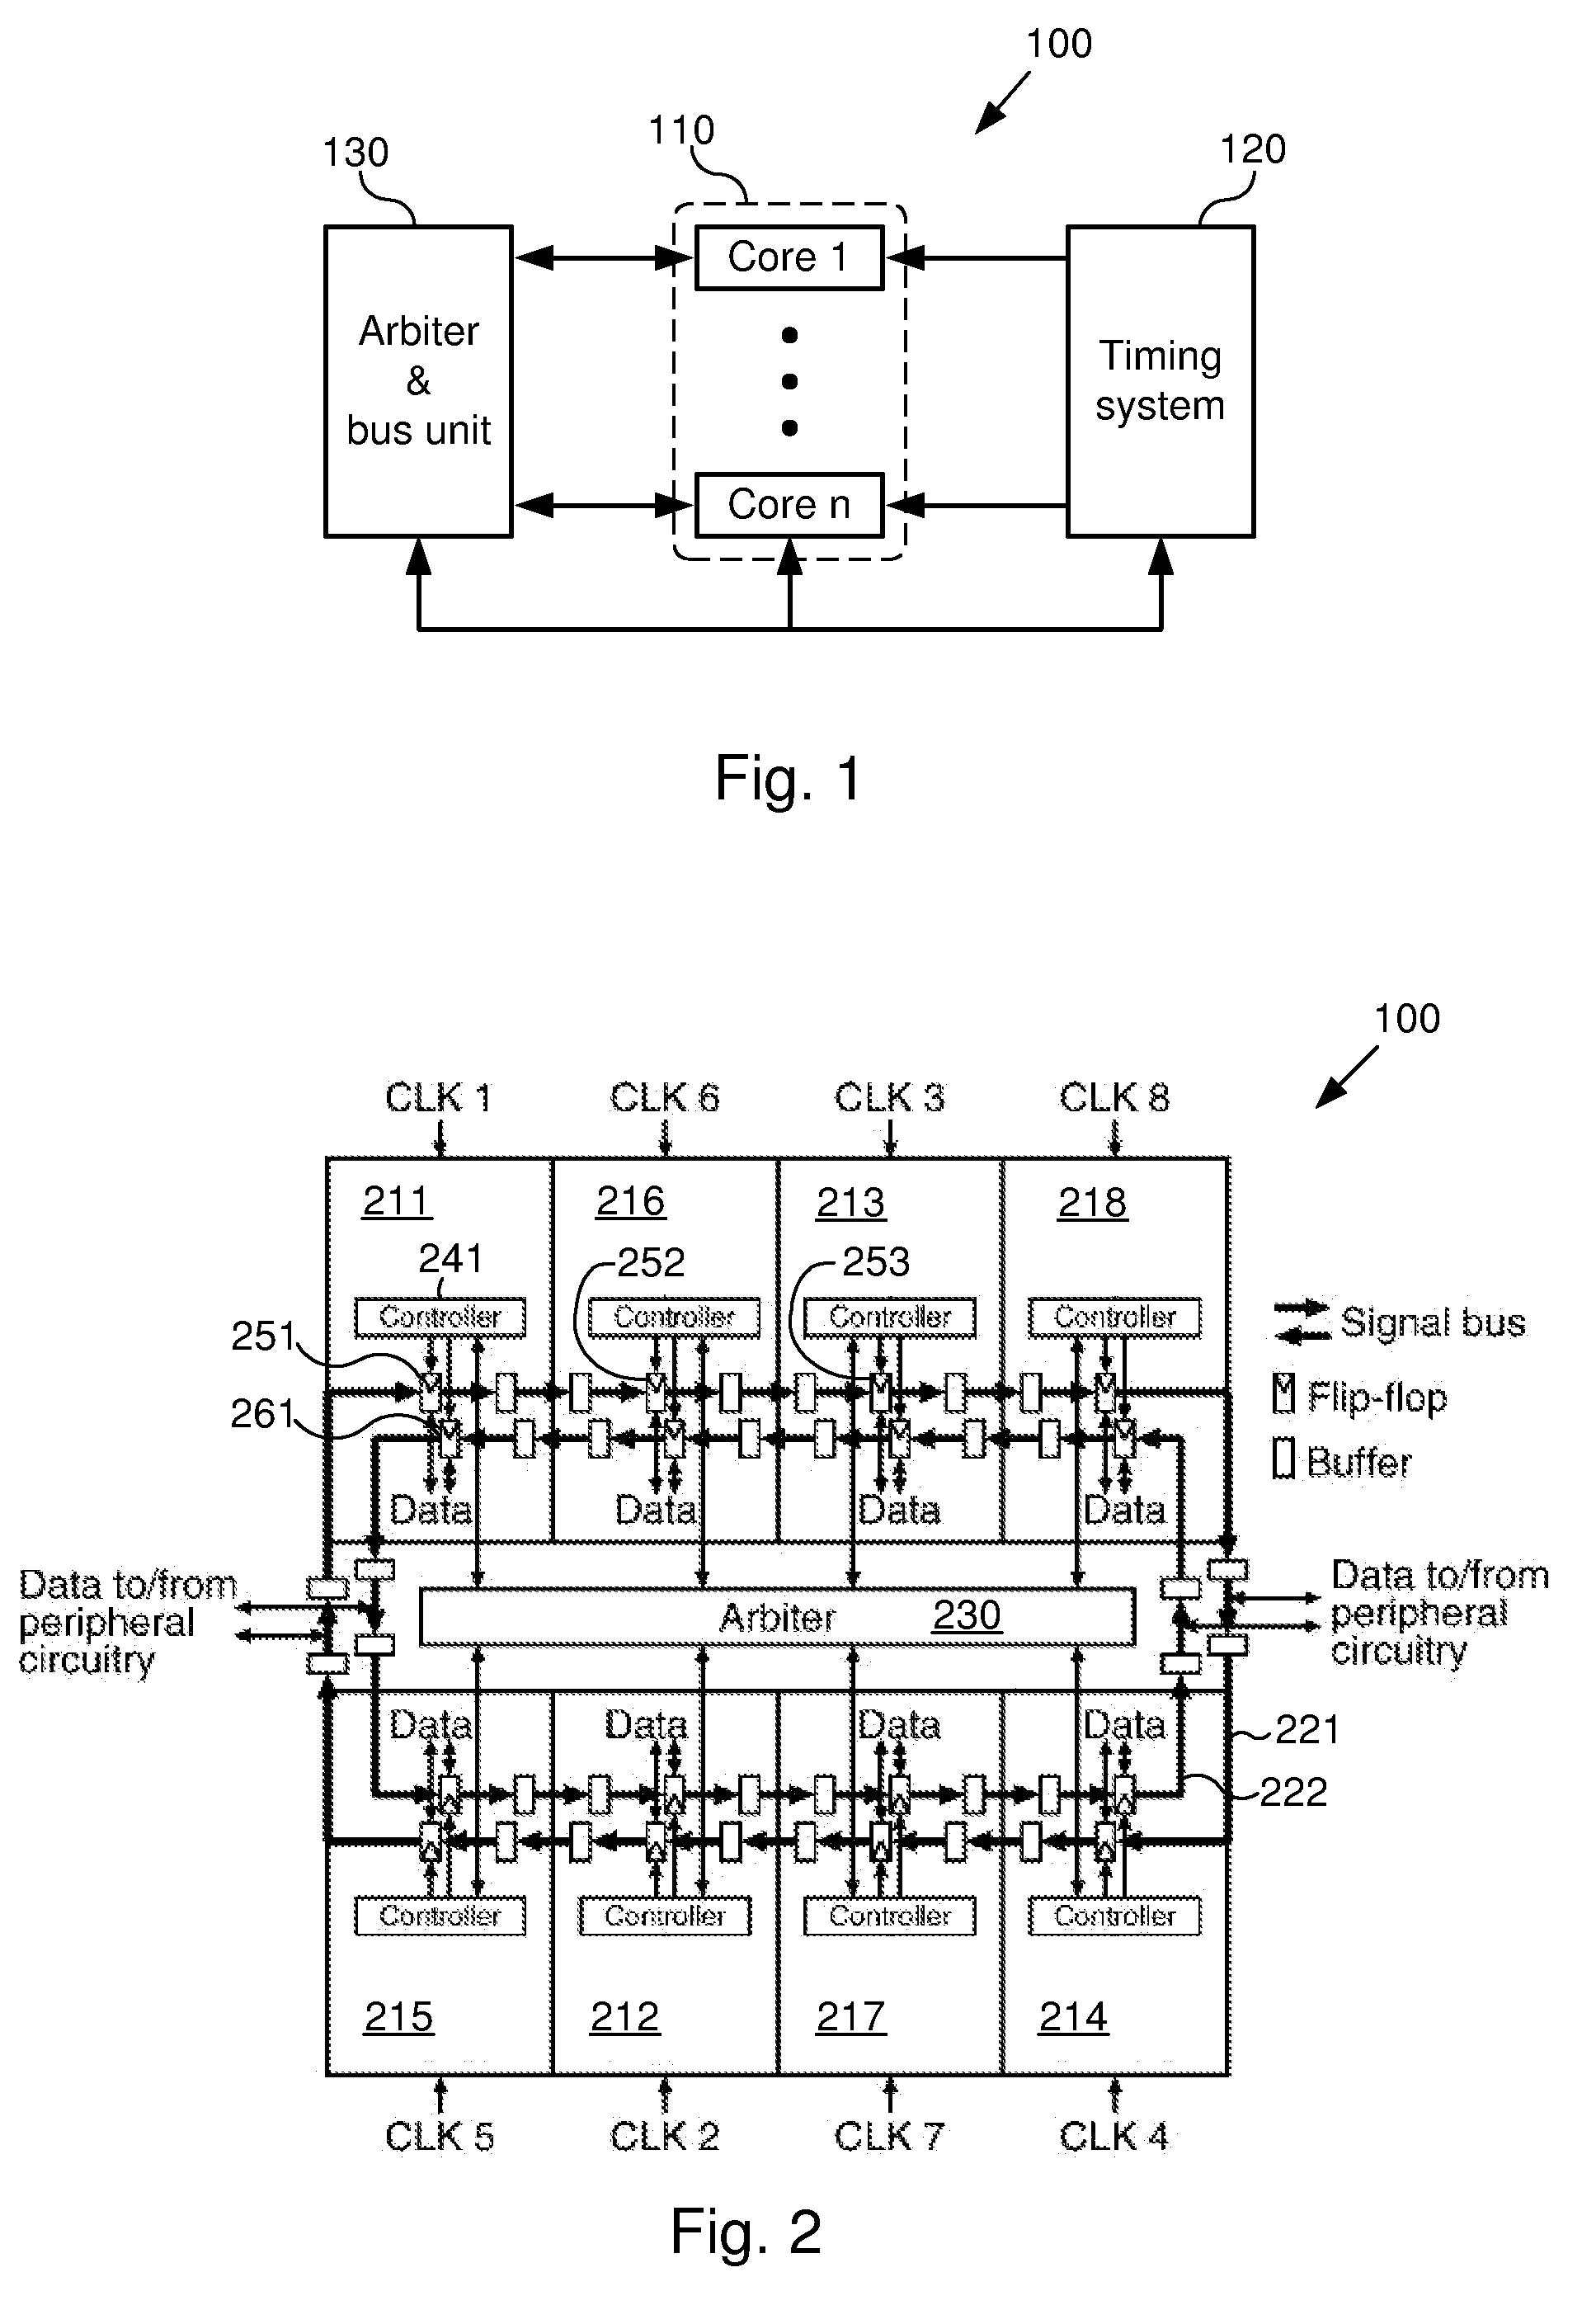 Multiphase Clocking Systems with Ring Bus Architecture